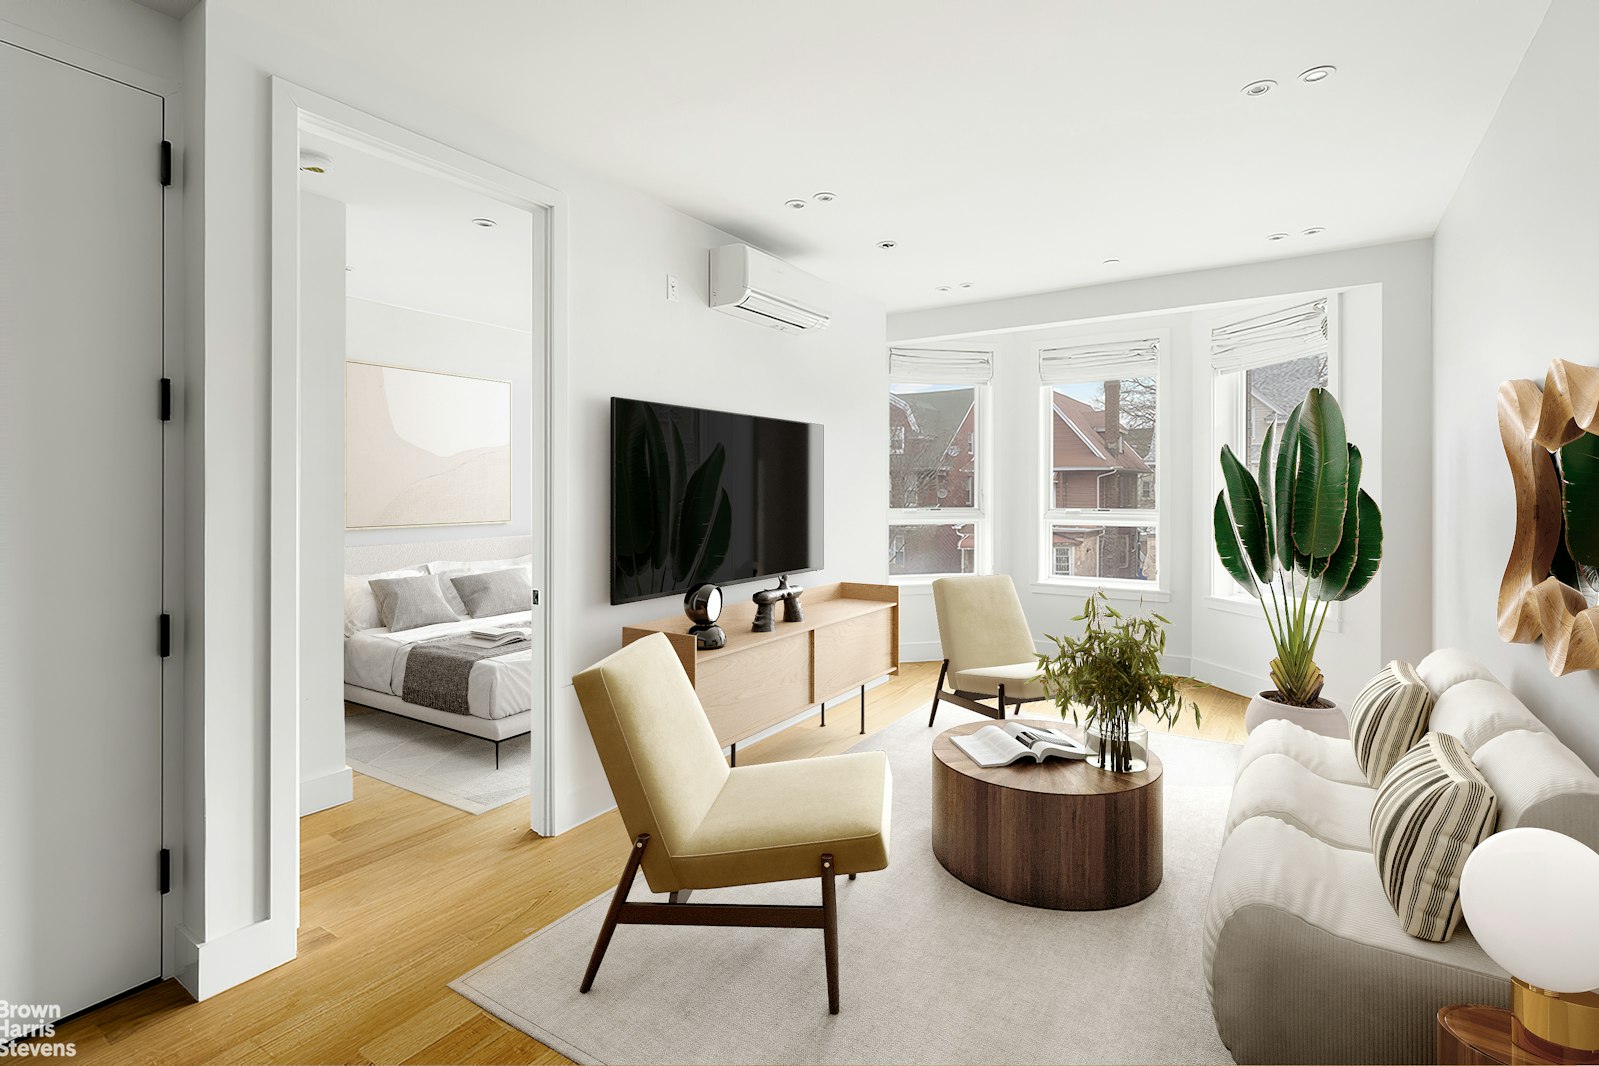 882 NEW YORK Avenue, New York, NY 11203, 1 Bedroom Bedrooms, 3 Rooms Rooms,1 BathroomBathrooms,Residential Lease,For Rent,882 NEW YORK AVENUE,NEW YORK,RPLU-63222968642